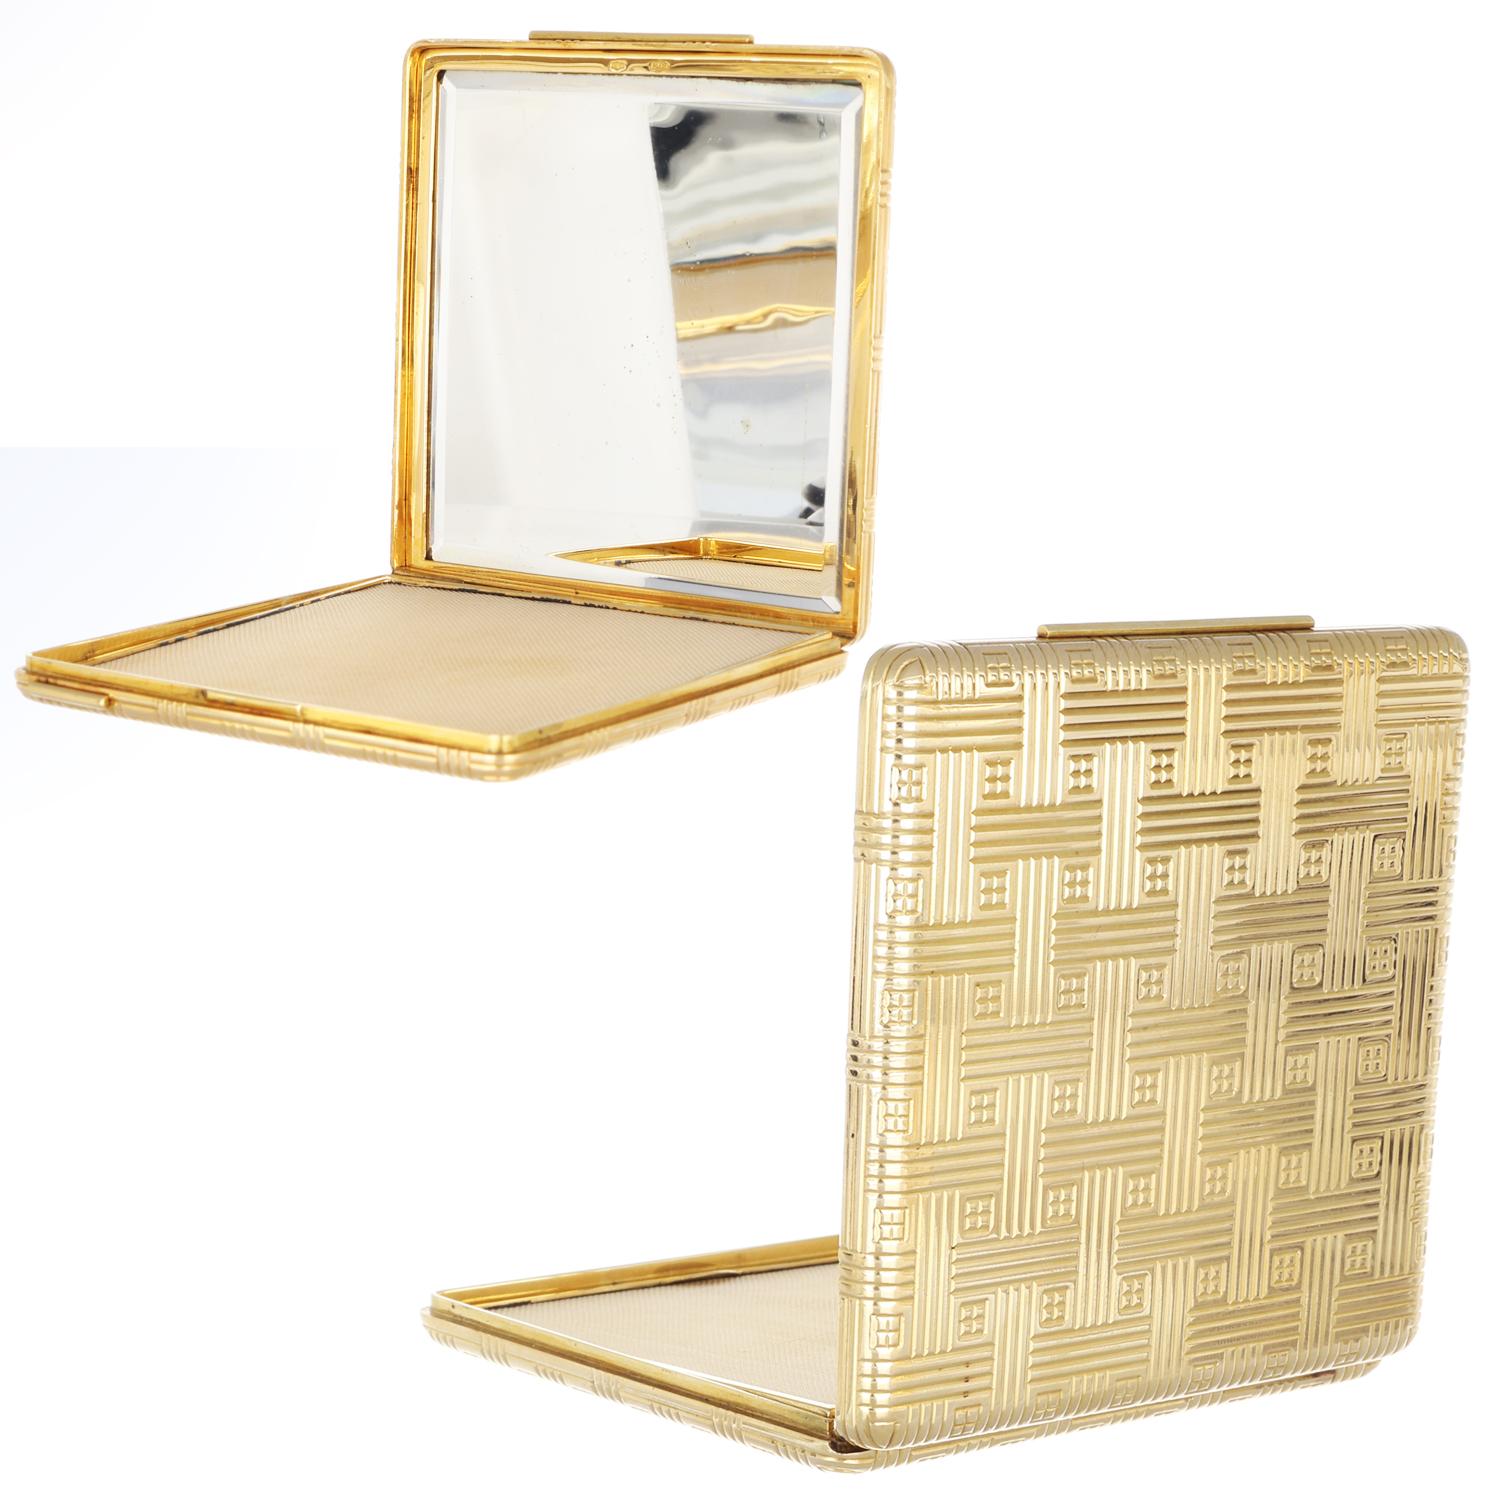 18Kt Gold Rare Compact Powder Box - Made in Italy 1970 circa - Geometric Pattern For Sale 8